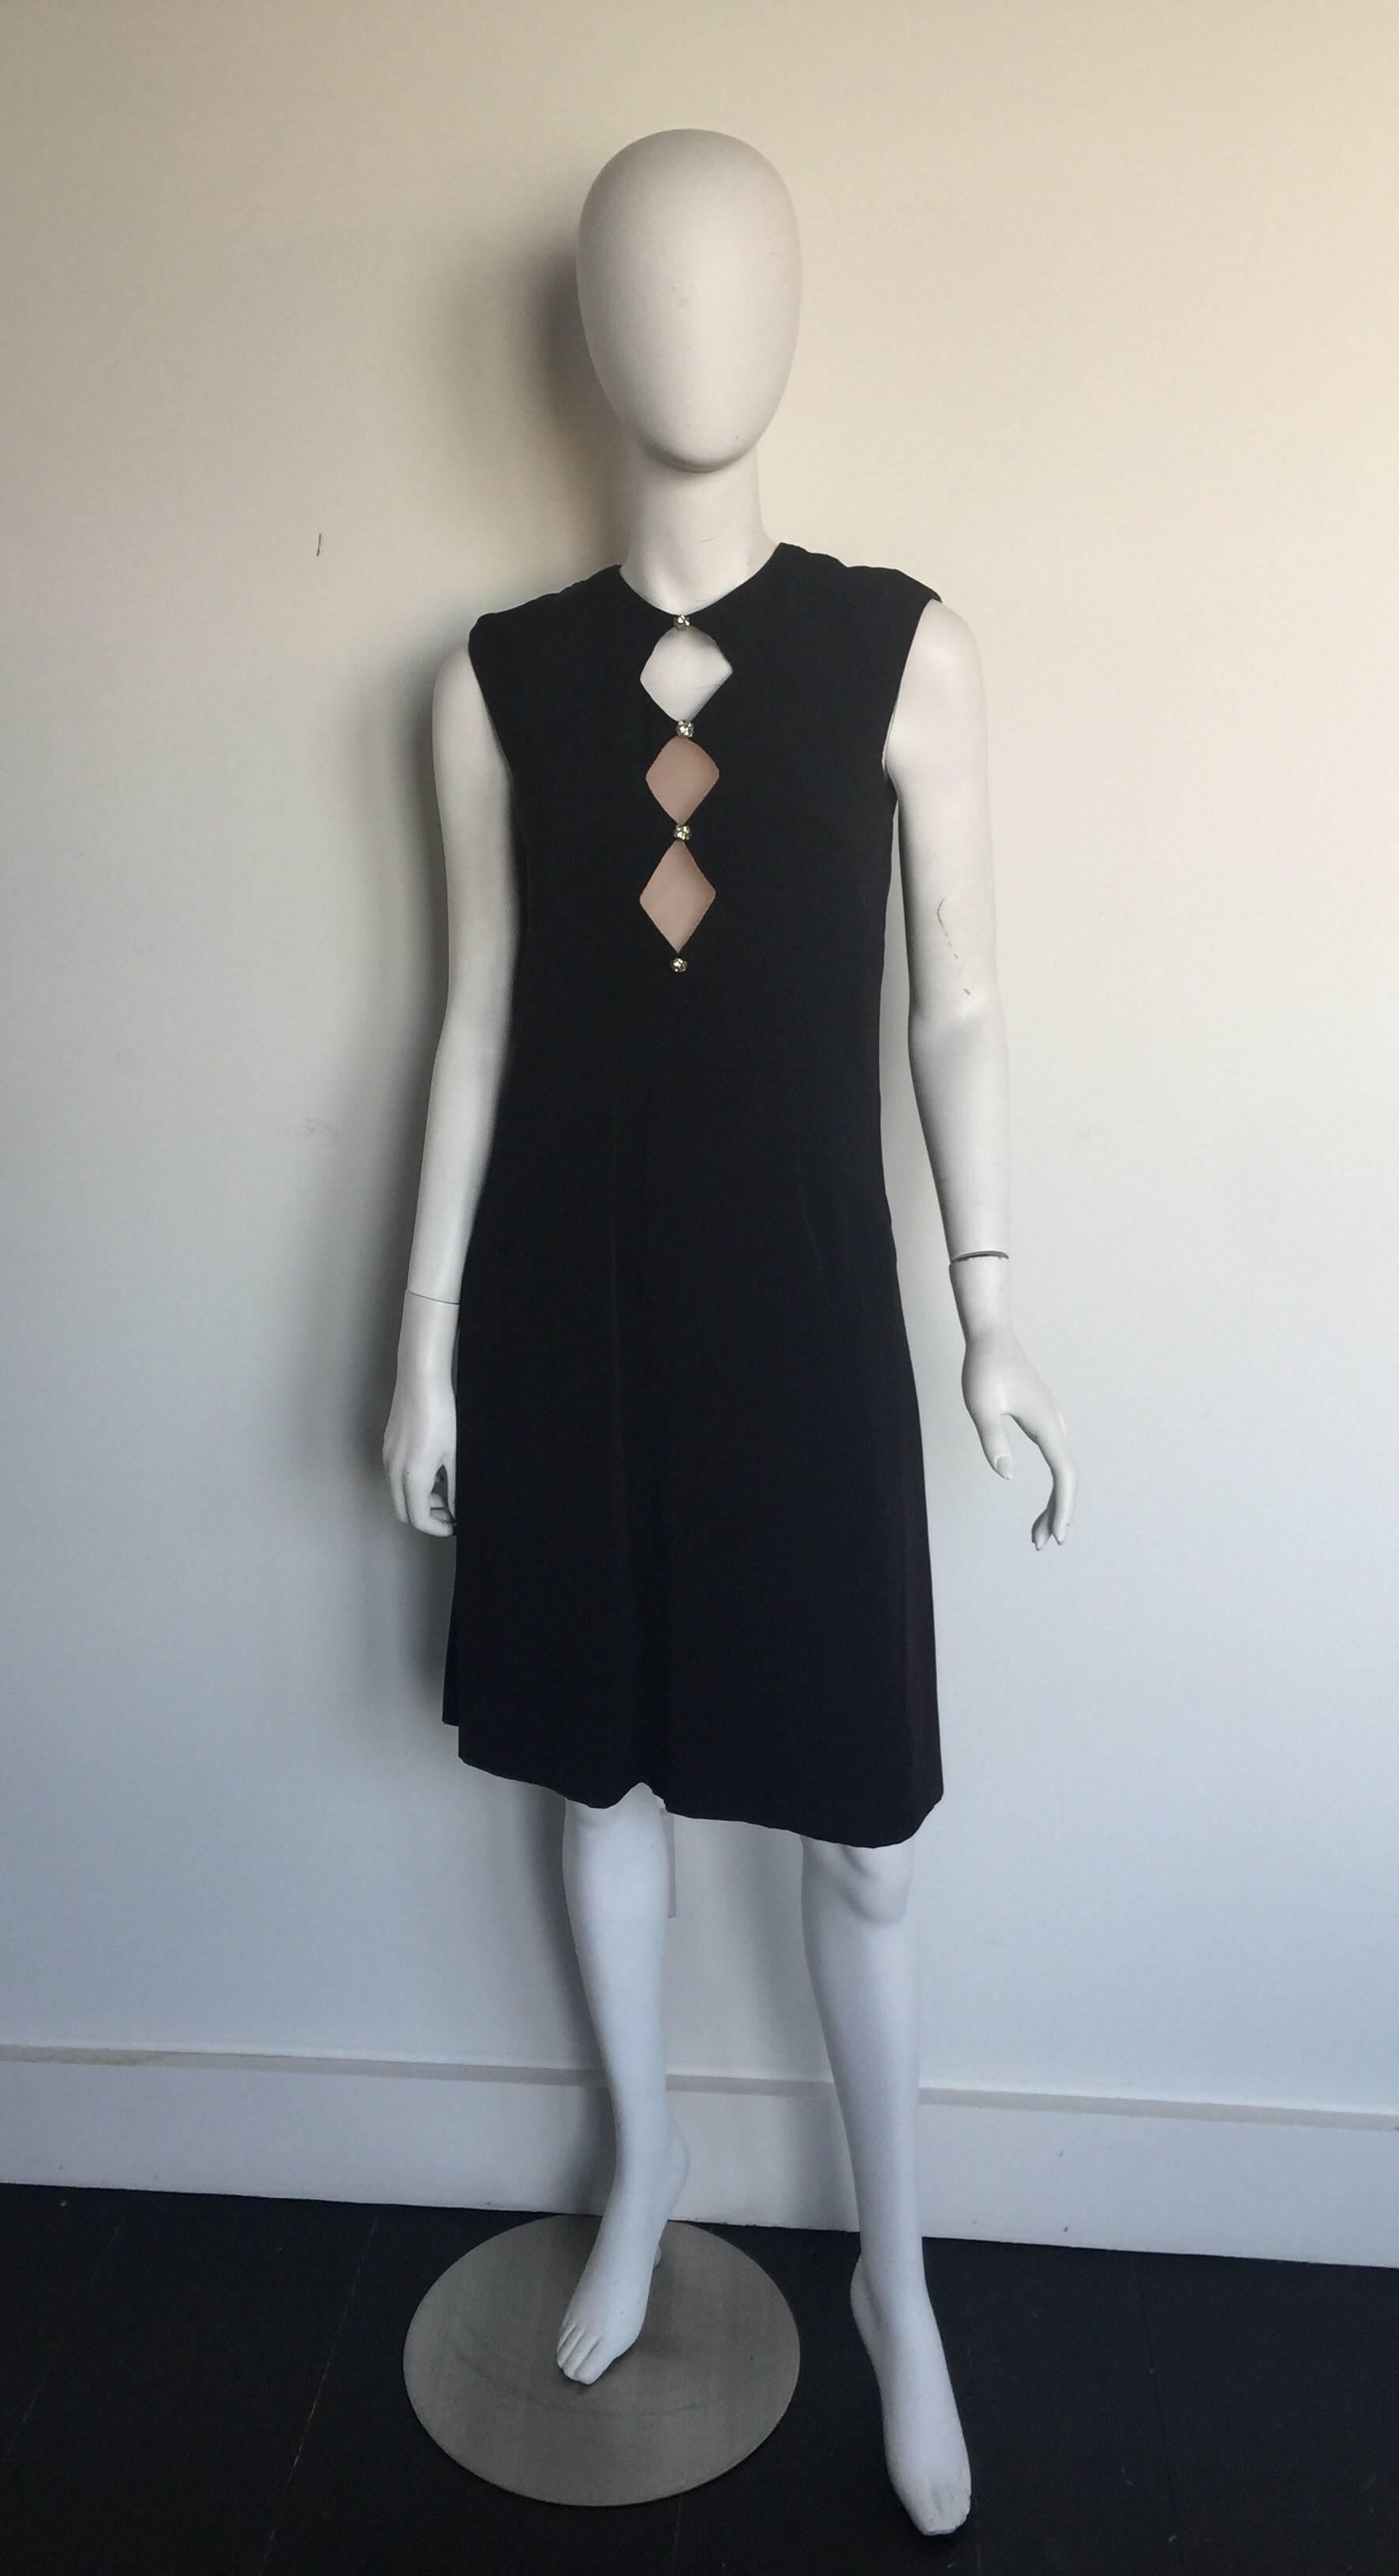 This black Estevez dress is from the 1970s.  It has a diamond shape cutout neckline with nude mesh in the second two diamonds.  It has crystal embellished buttons and the same open detailing on the back.  